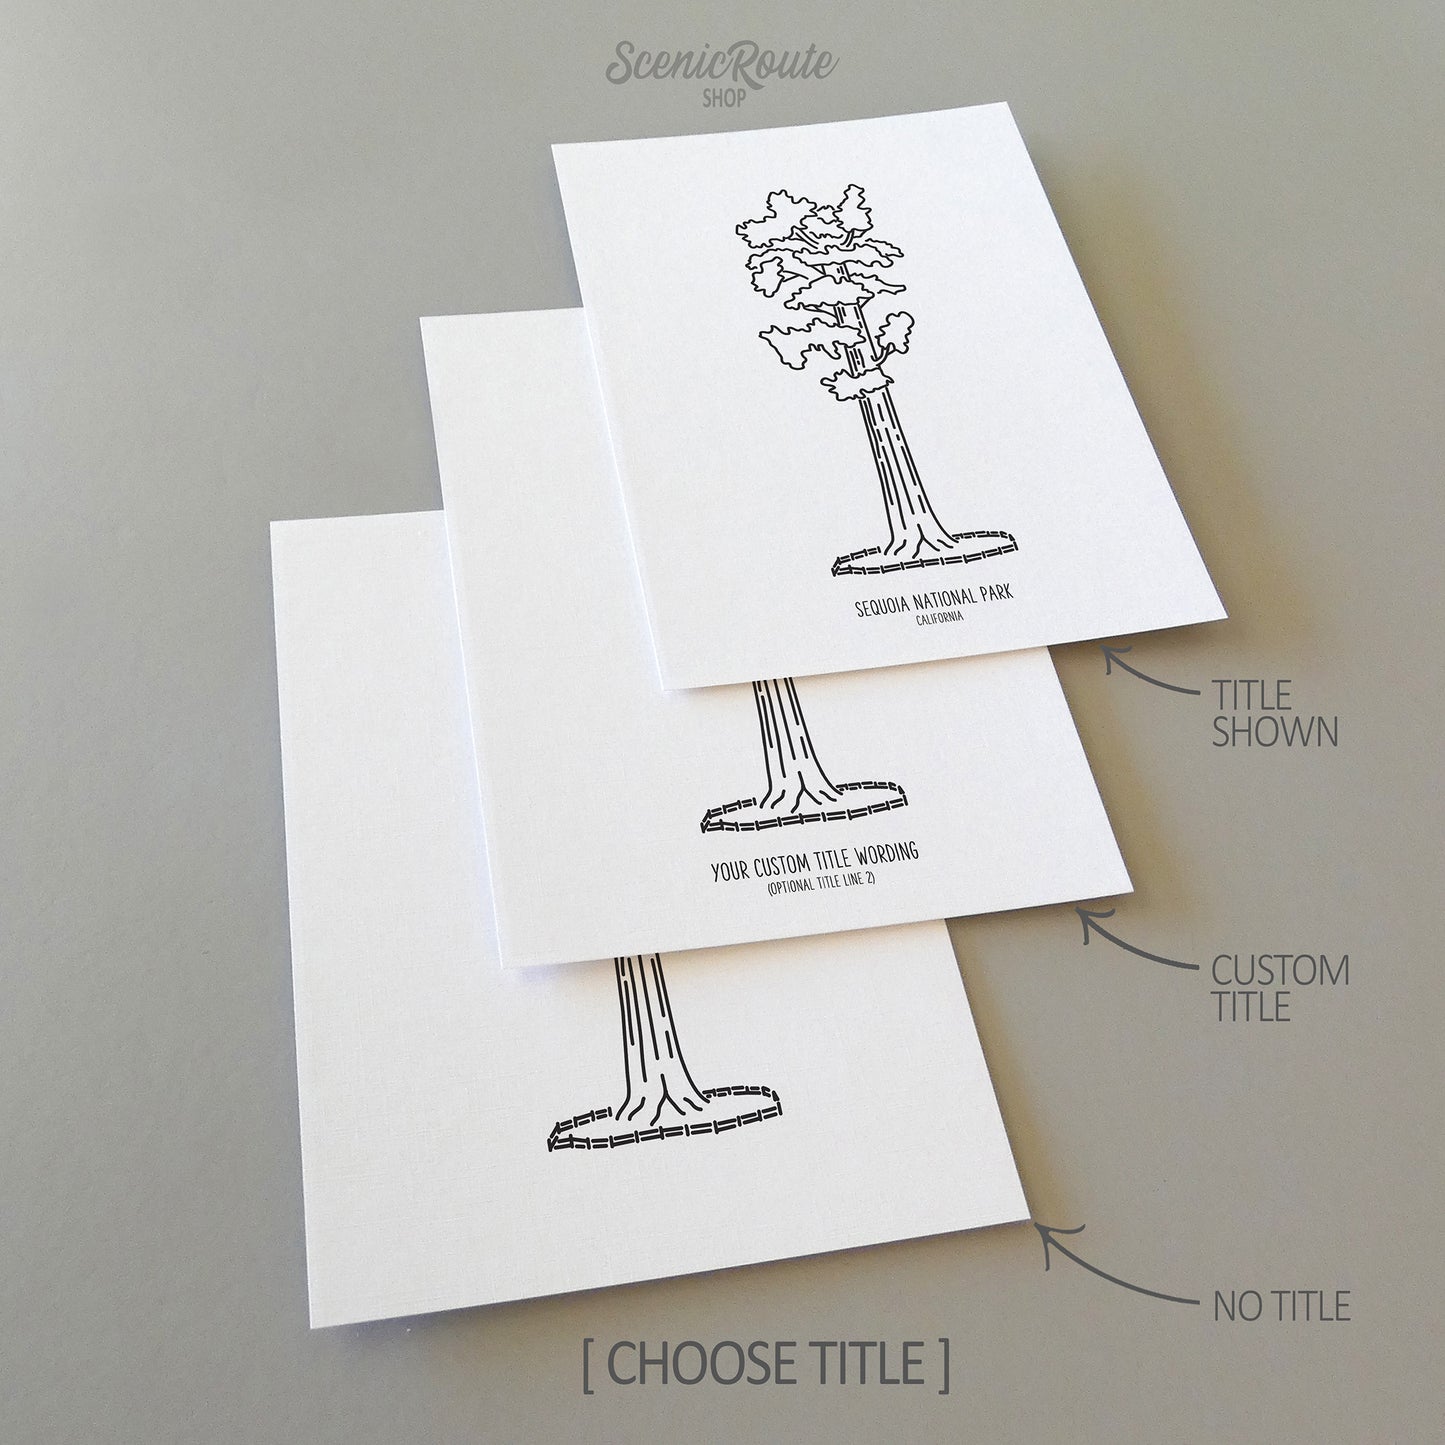 Three line art drawings of Sequoia National Park on white linen paper with a gray background. The pieces are shown with title options that can be chosen and personalized.